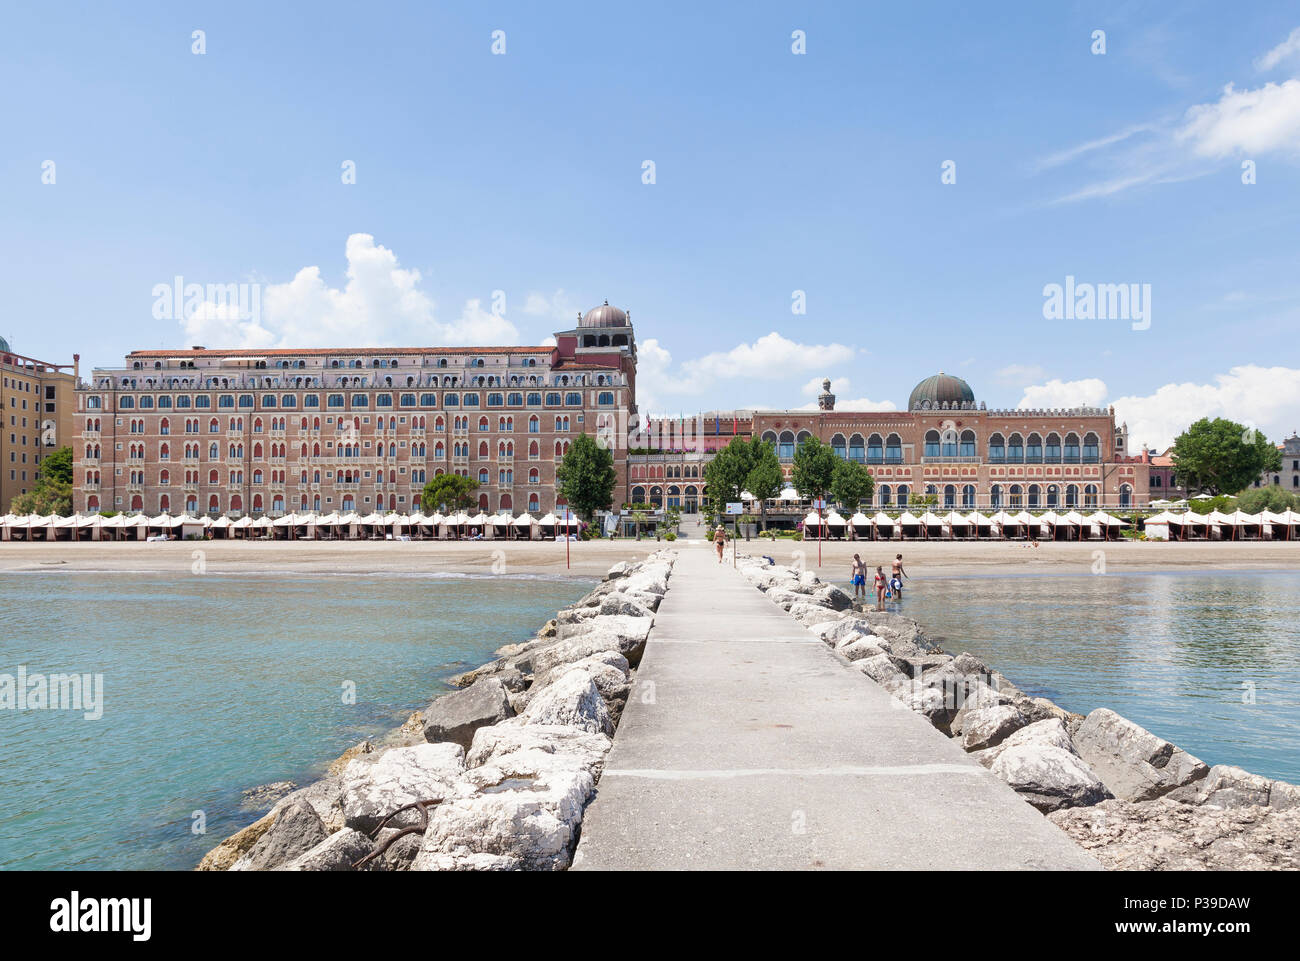 View along the breakwater of the Hotel Excelsior and beach with cabanas or huts, Lido di Venezia, Lido Island, Venice, Veneto, Italy. People bathing i Stock Photo